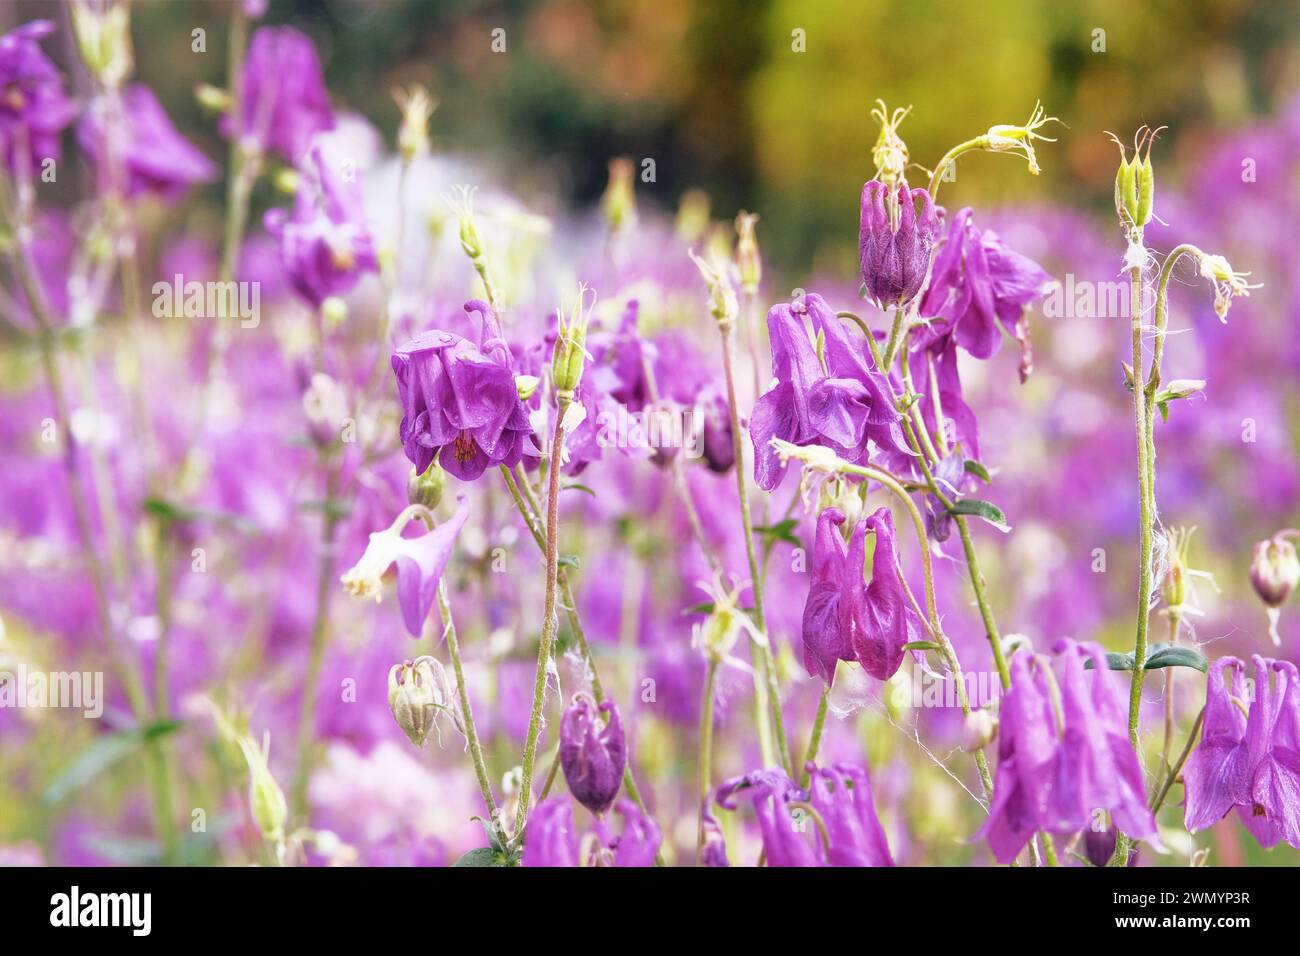 Aquilegia vulgaris flowers blooming with light bright petals. Spring blurred background of nature. Low mountain range. Stock Photo